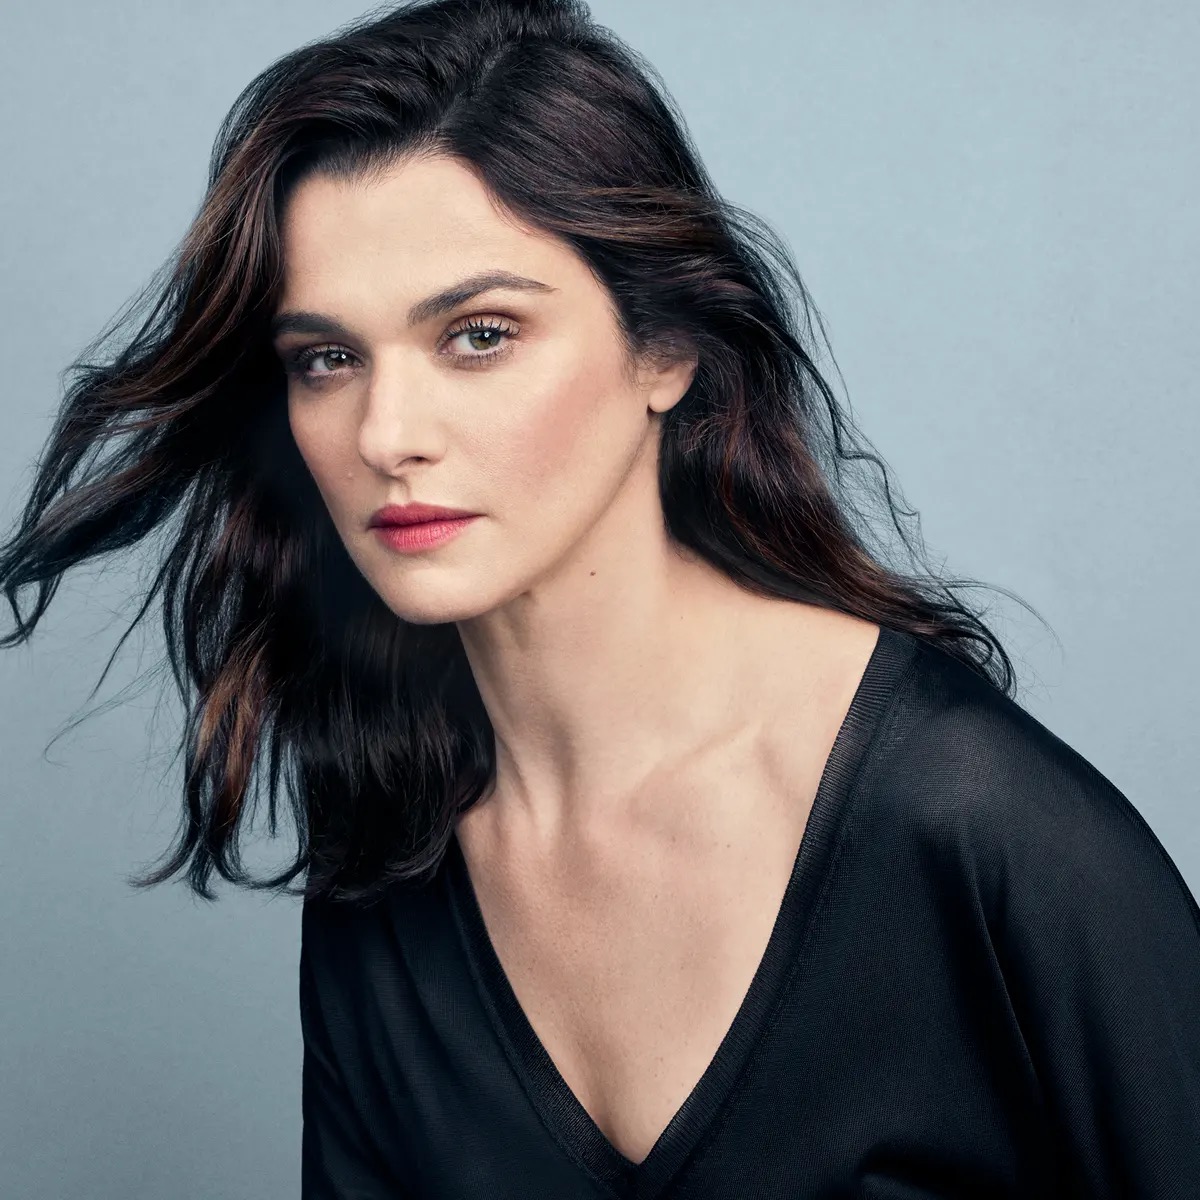 It’s Time to Find Out What Fantasy World You Belong in With the Celebs You Prefer Rachel Weisz